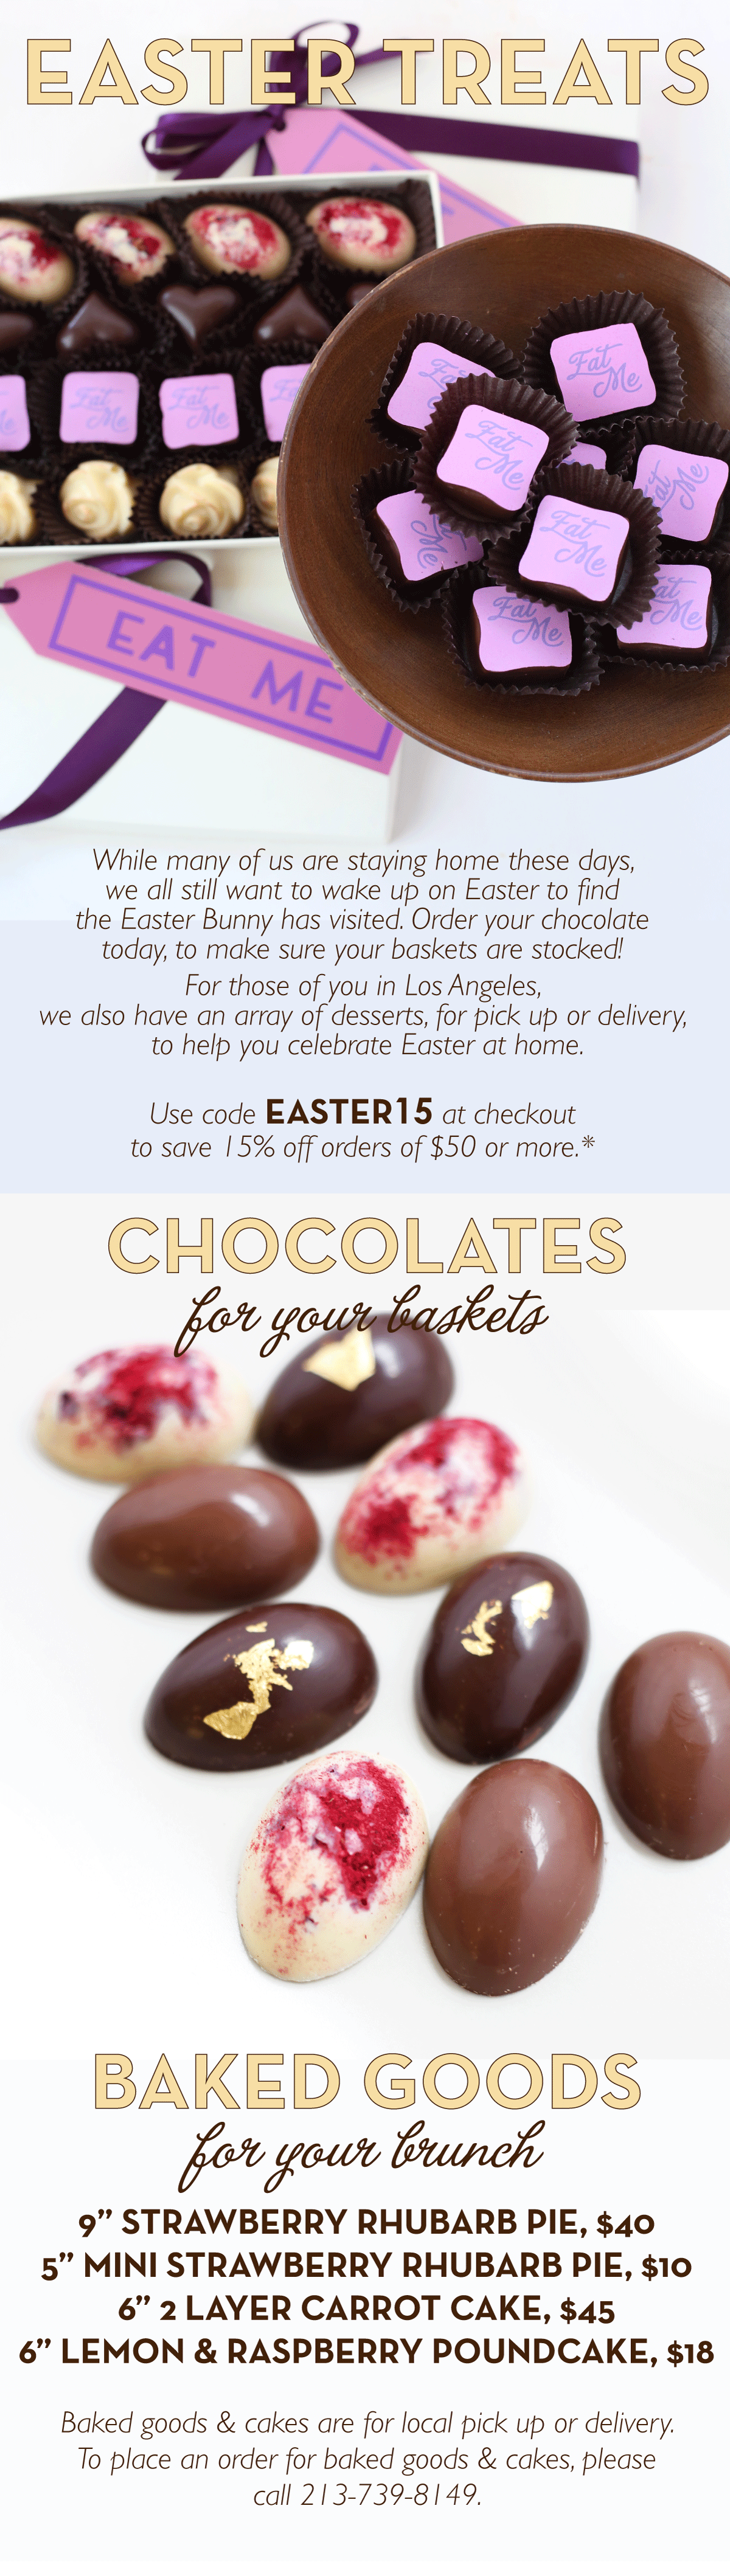 While many of us are staying home these days, we all still want to wake up on Easter to find the Easter Bunny has visited. Order your chocolate today, to make sure your baskets are stocked! For those of you in Los Angeles, we also have an array of desserts, for pick up or delivery, to help you celebrate Easter at home. Use code EASTER15 at checkout to save 15% off orders of $50 or more.*